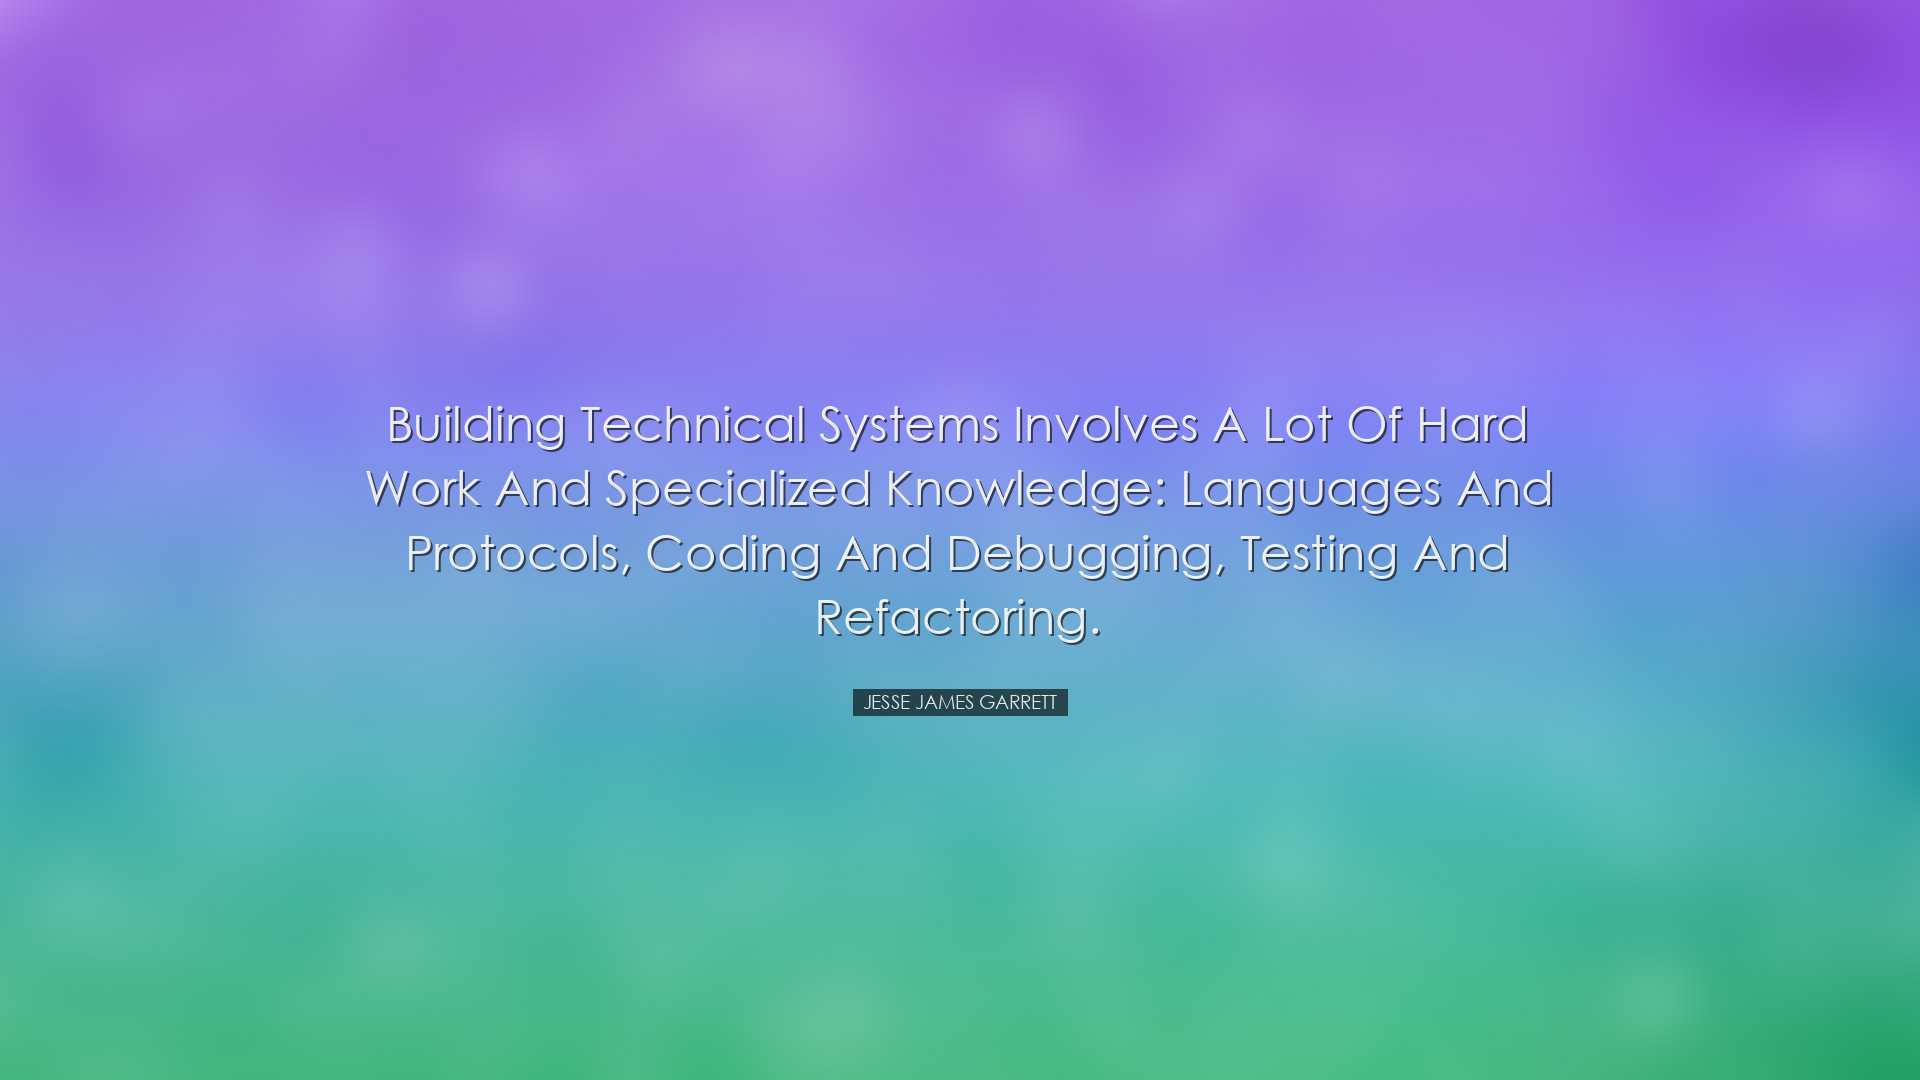 Building technical systems involves a lot of hard work and special